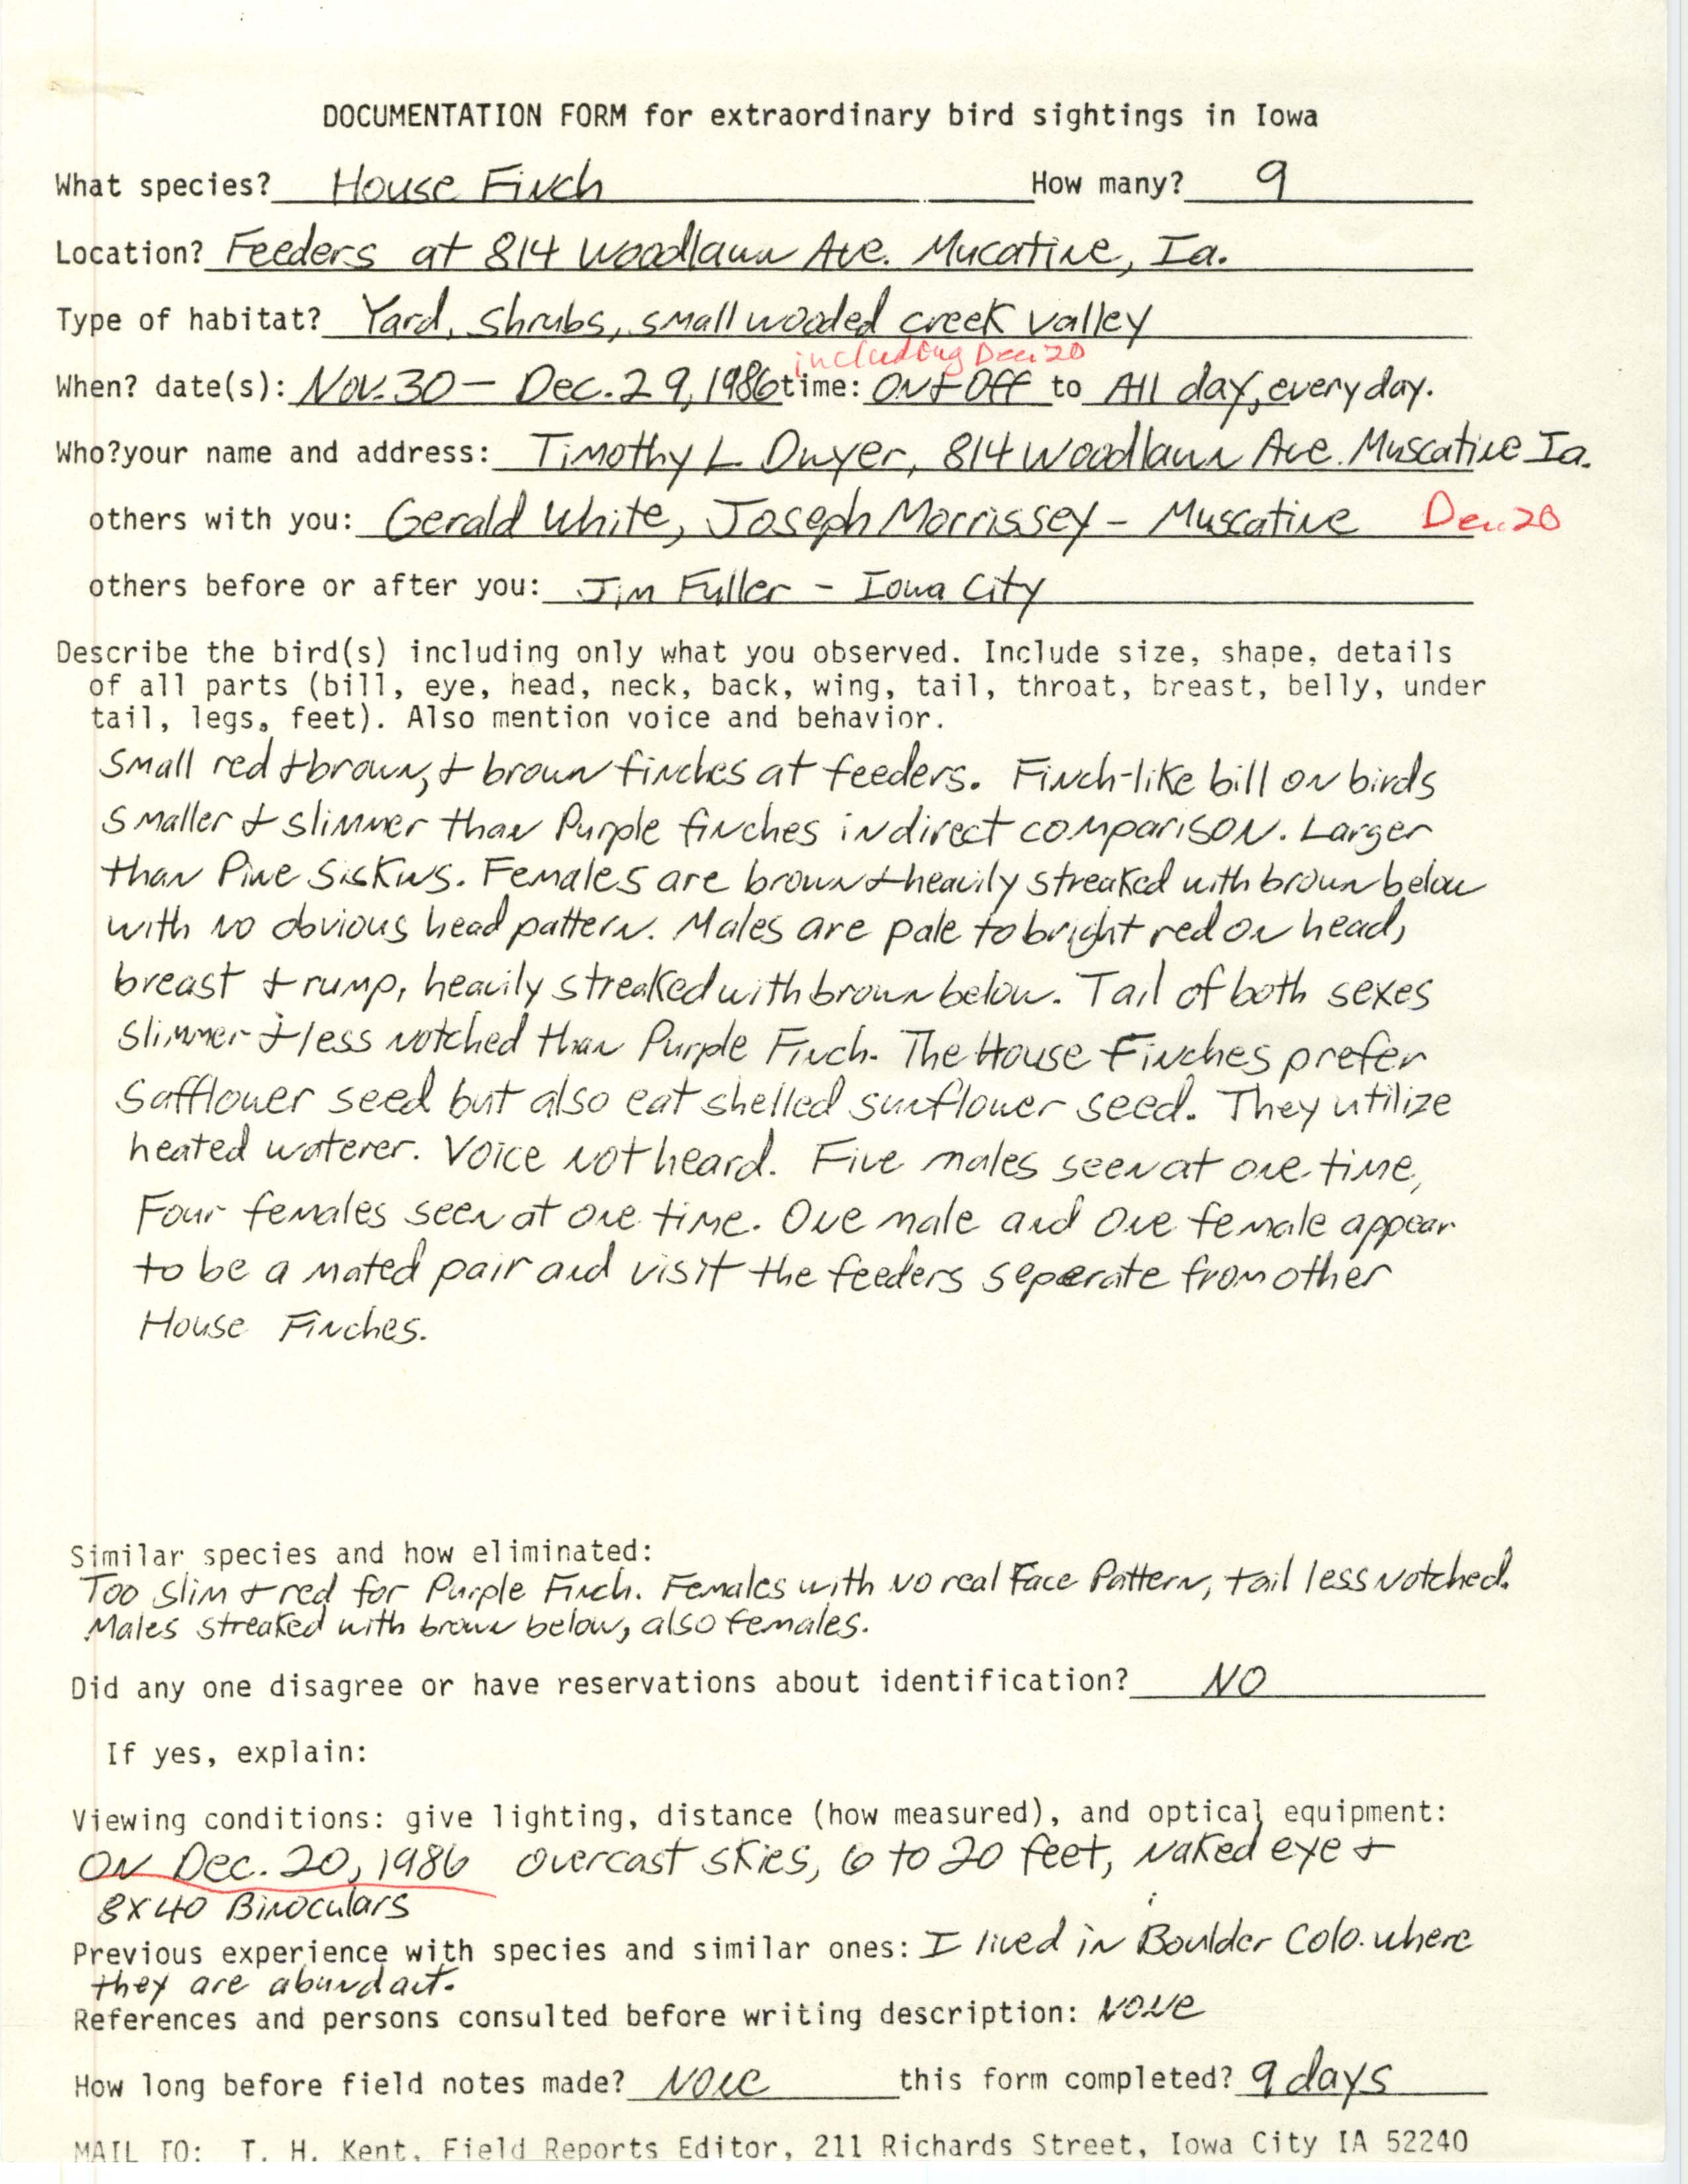 Rare bird documentation form for House Finch at Muscatine in 1986